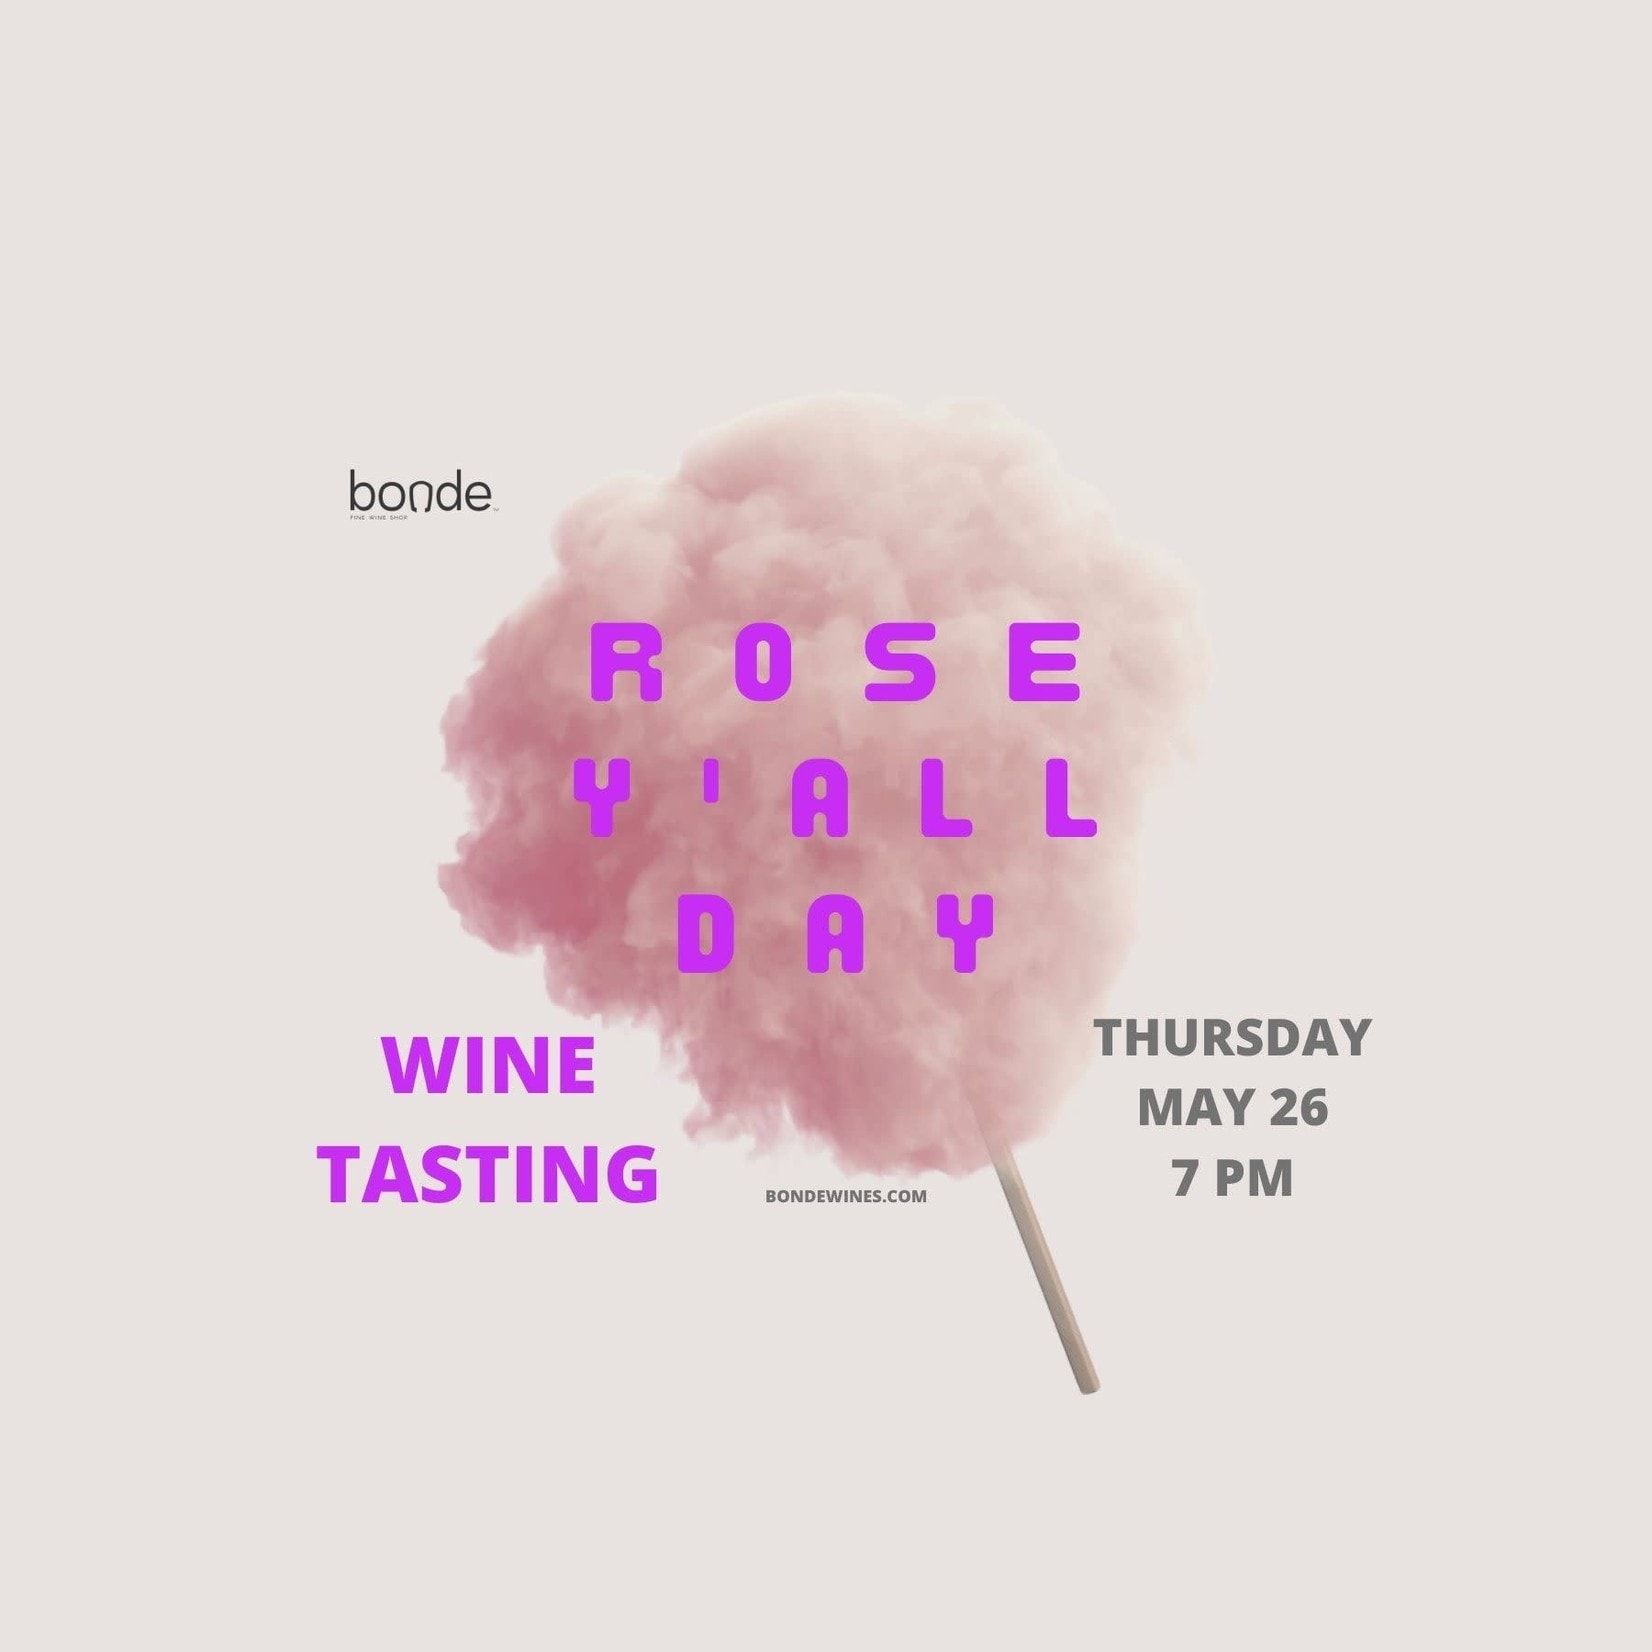 Wine Tasting - Rosé Y'all Day - Thursday, May 26 - 7:00 p.m.